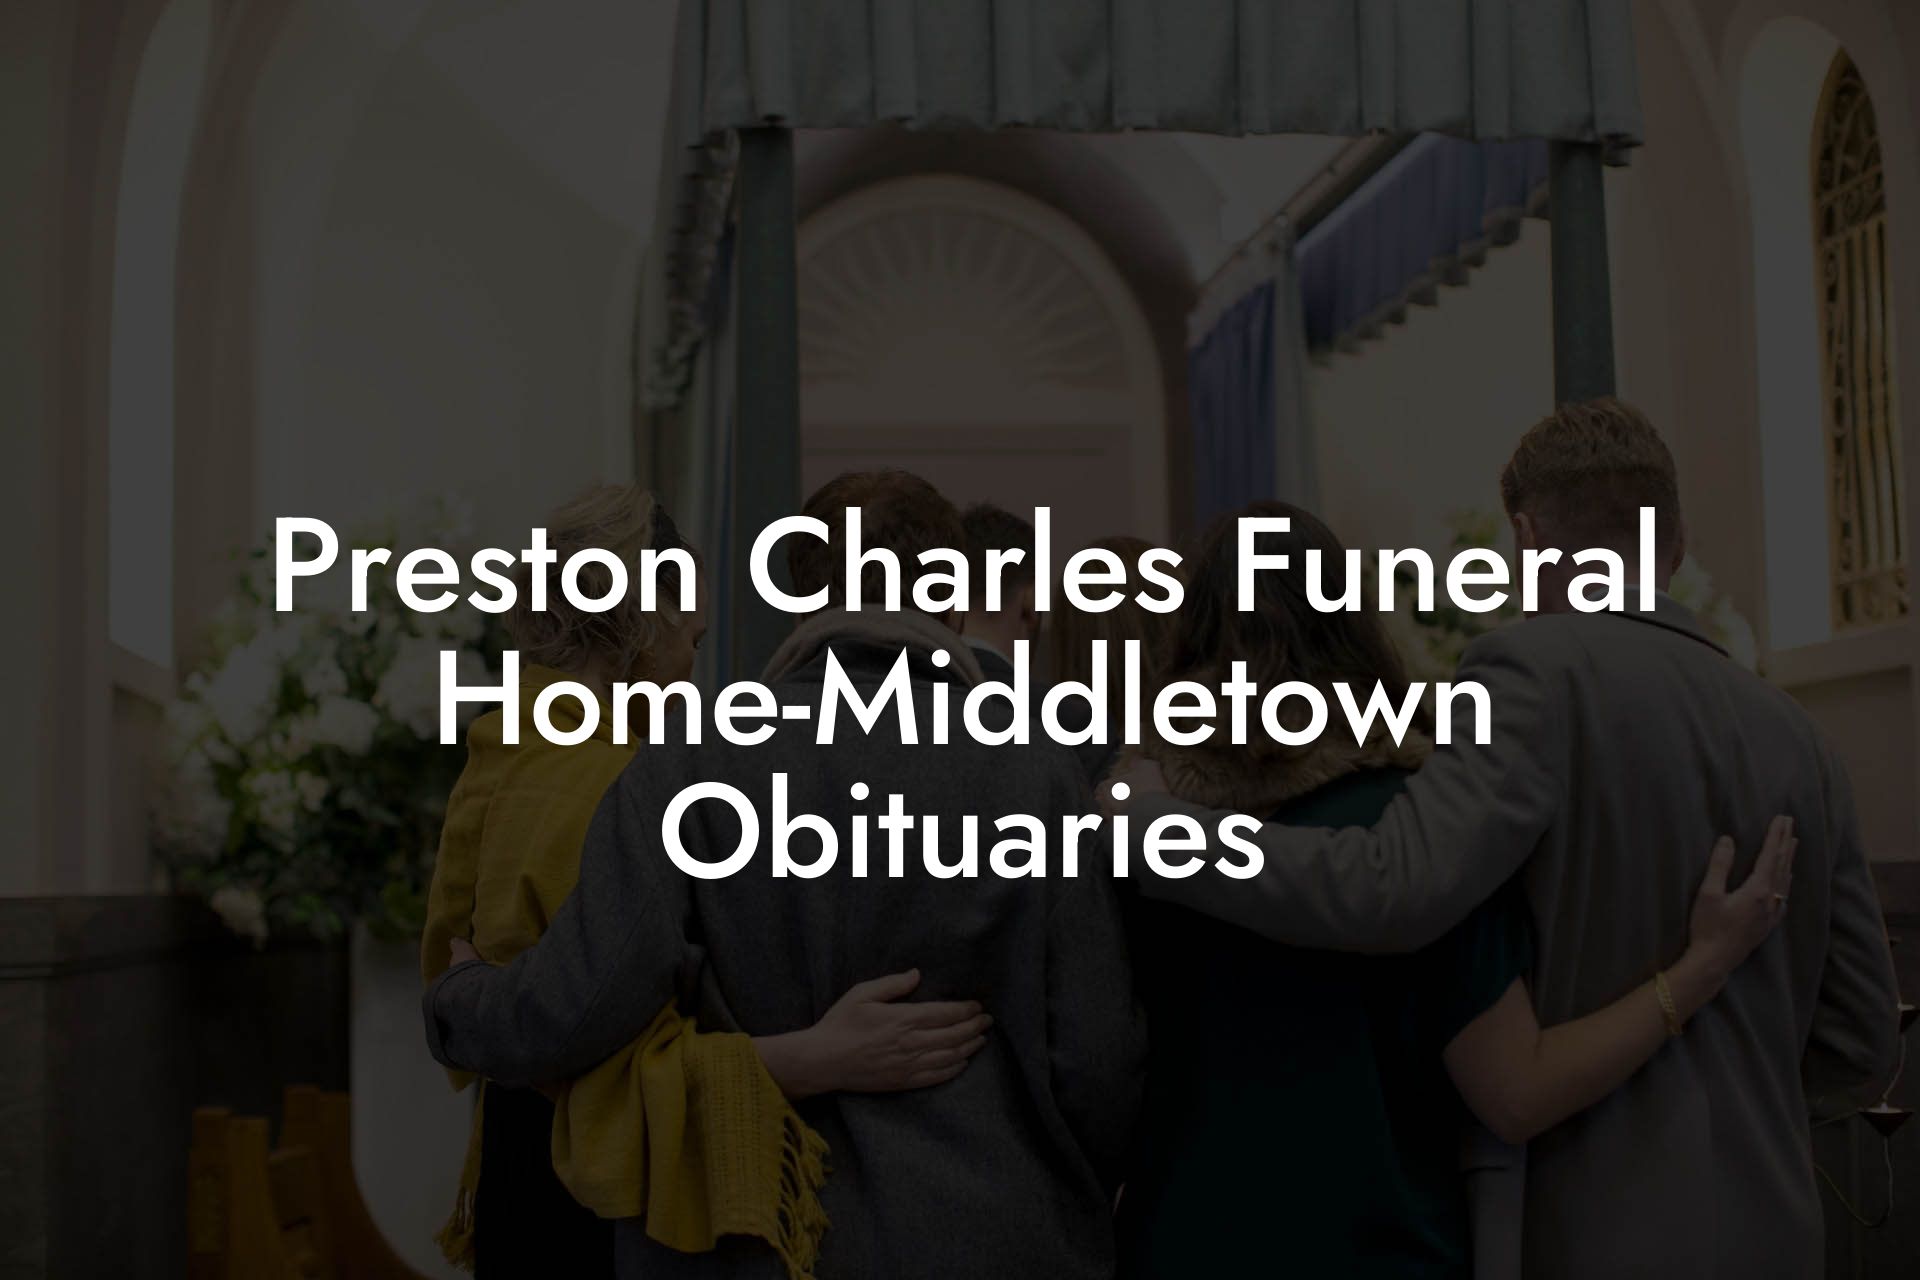 Preston Charles Funeral Home-Middletown Obituaries